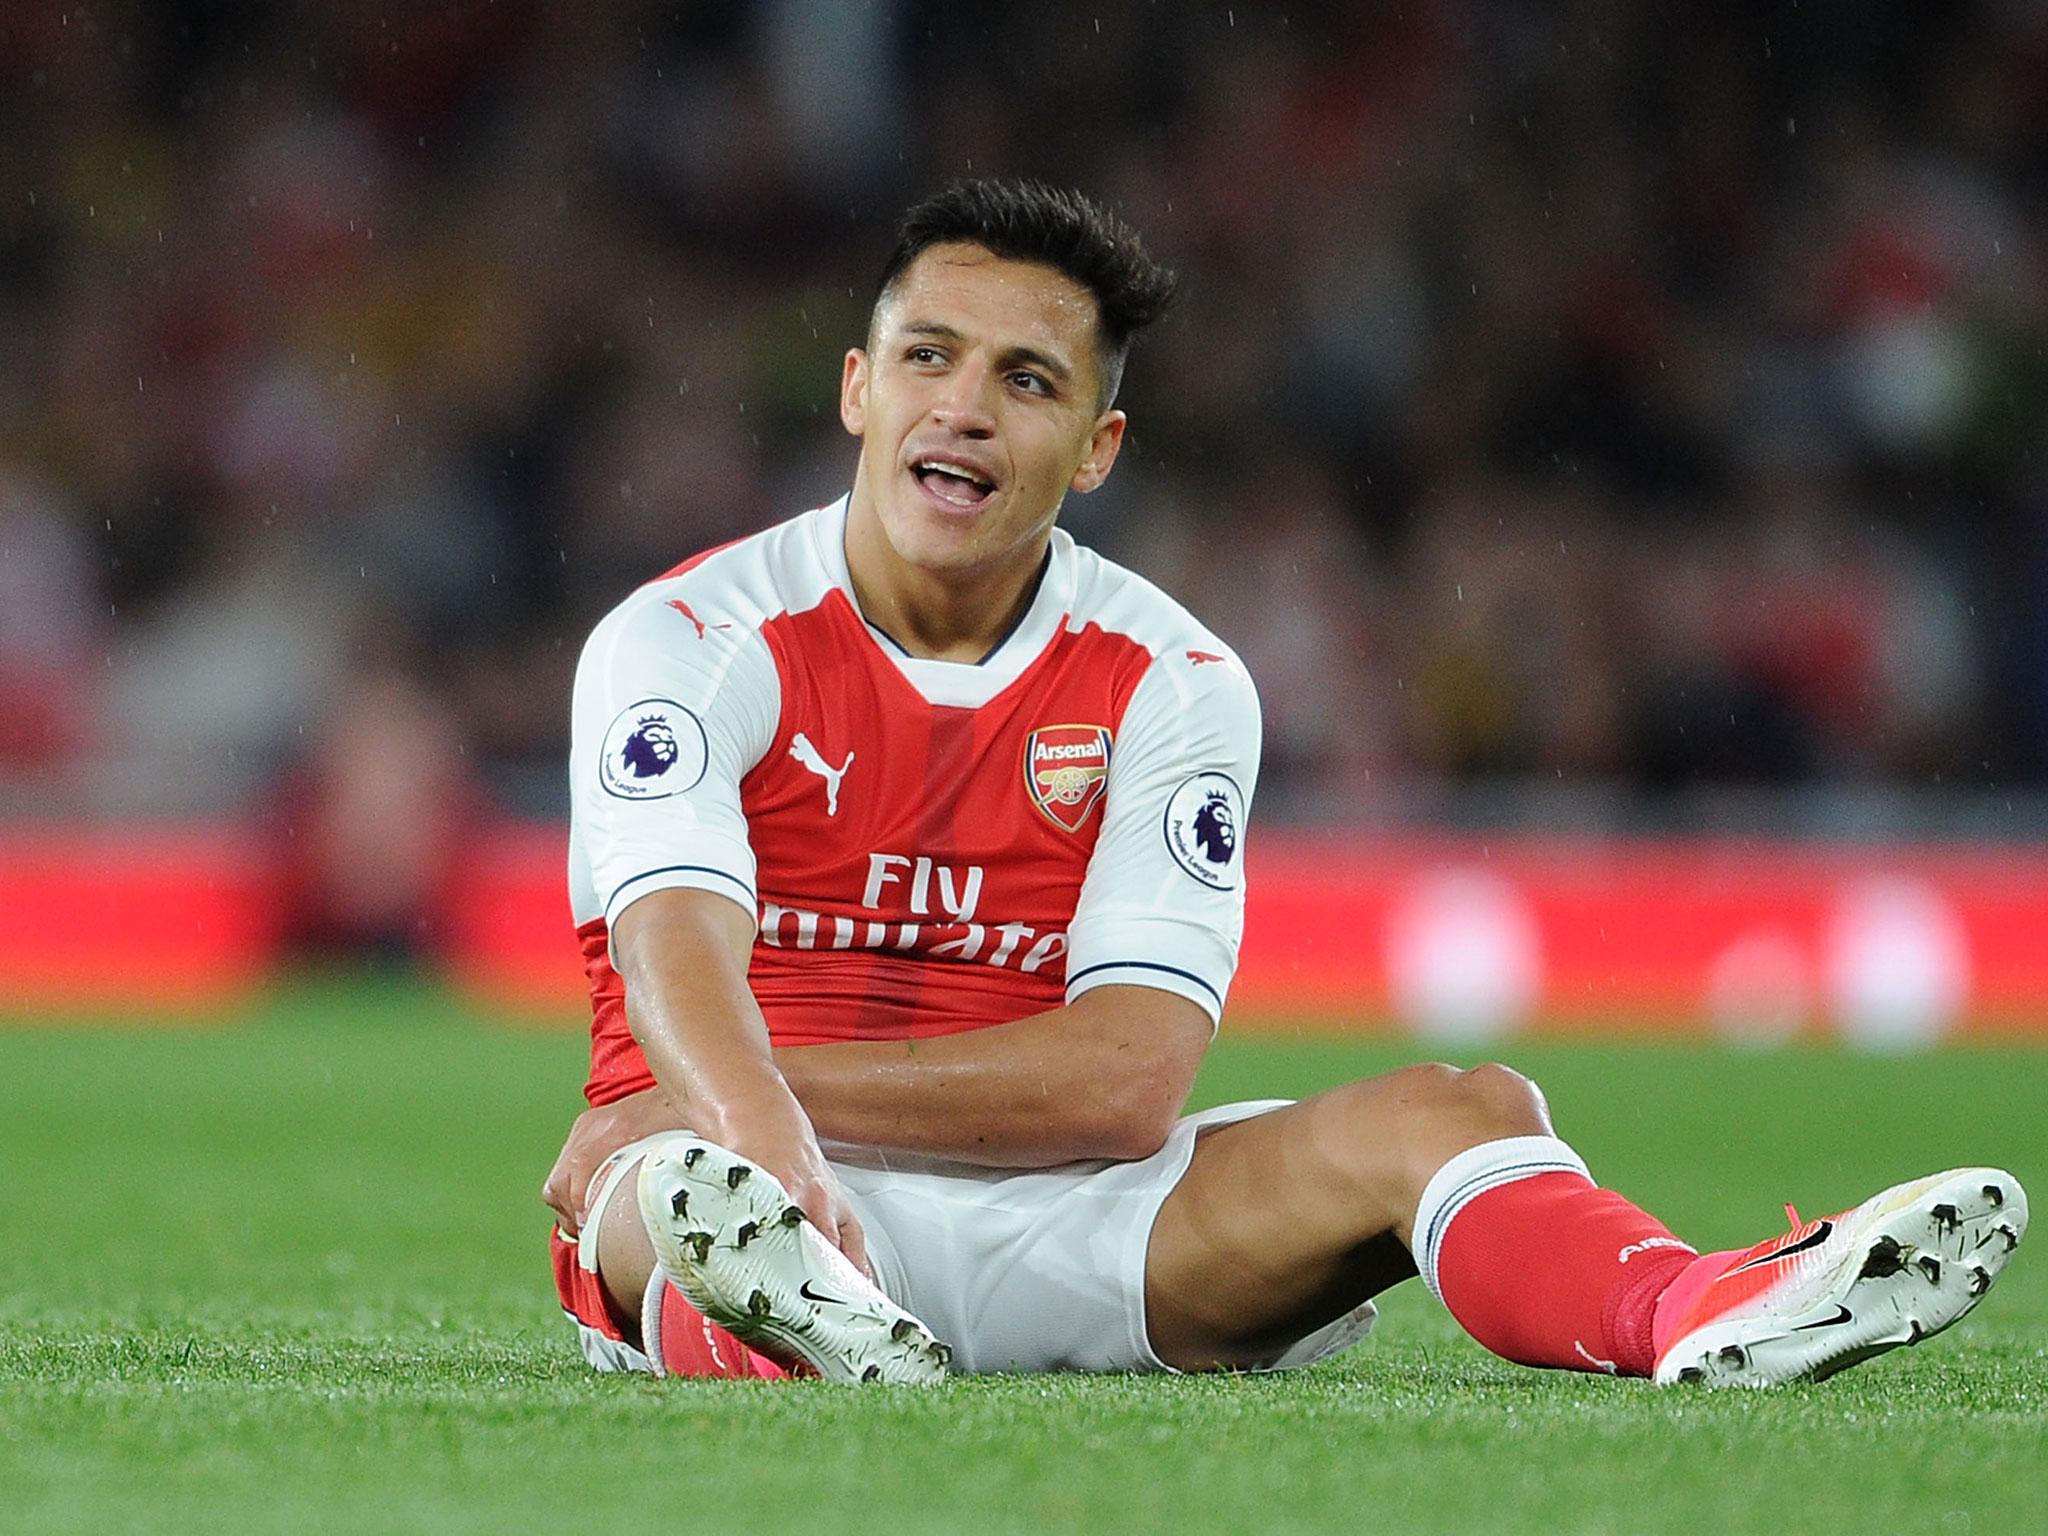 Alexis Sanchez looks set to leave Arsenal this summer if they fail to qualify for the Champions League